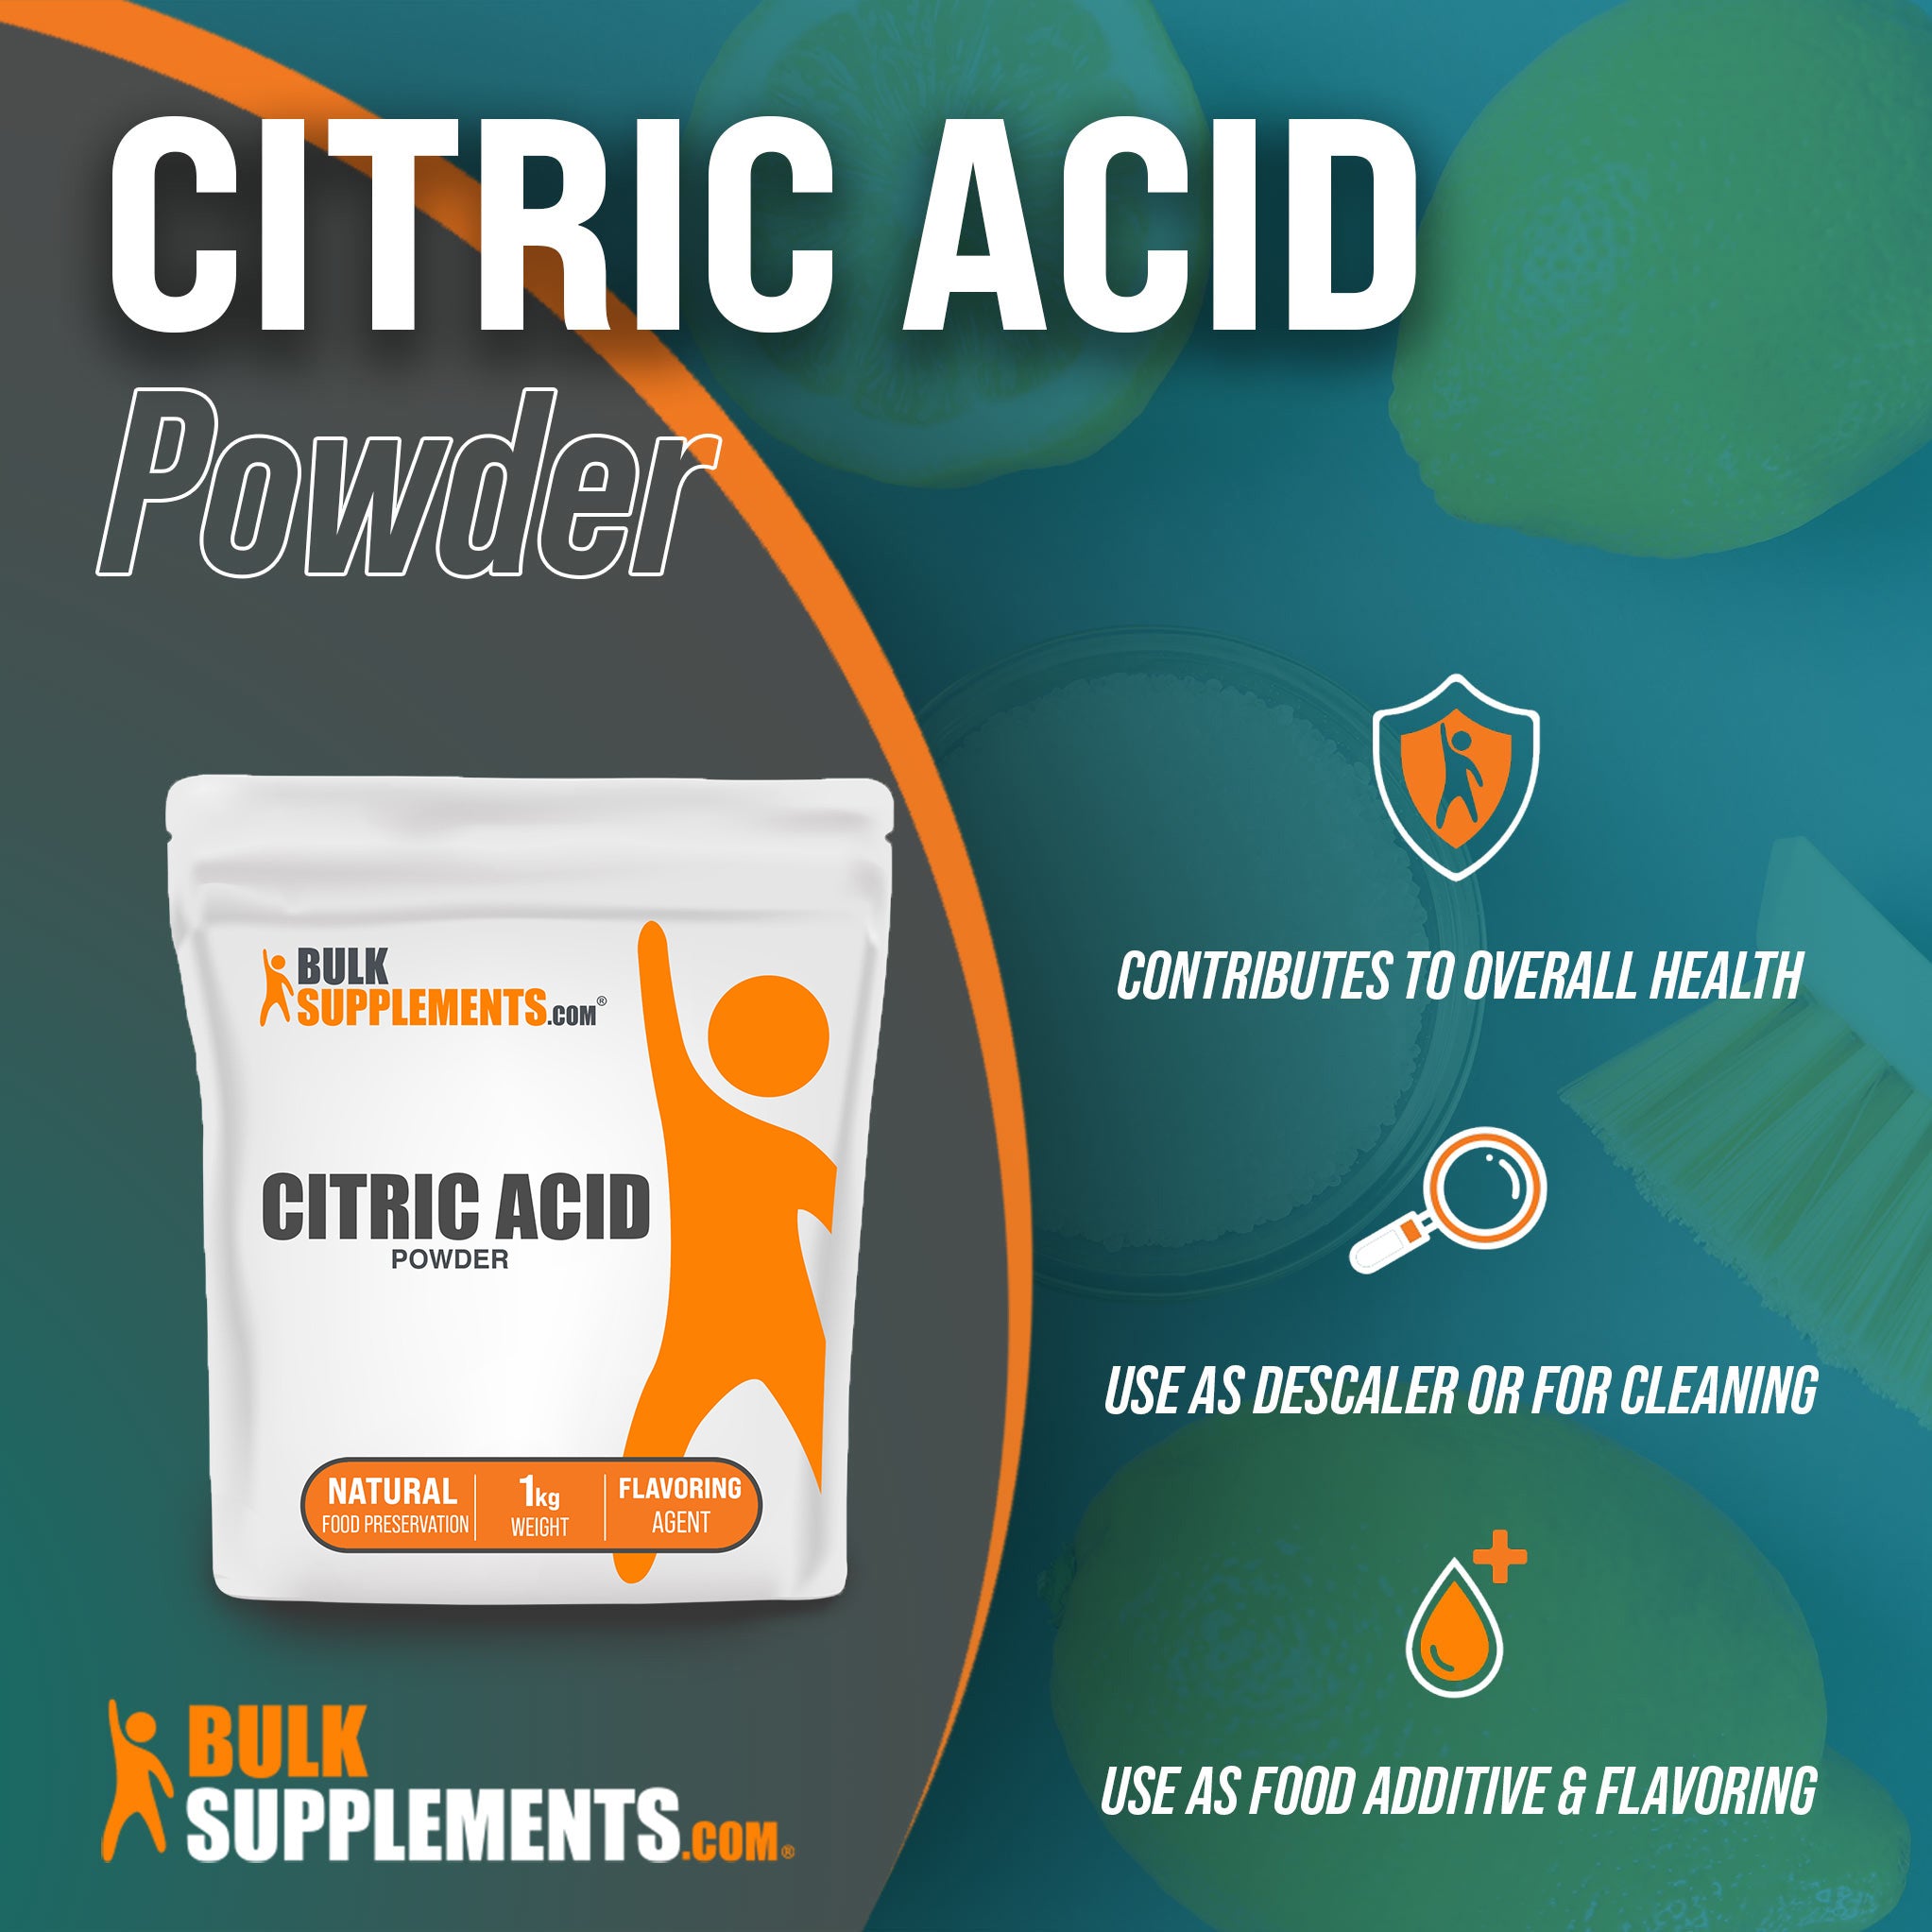 Uses for Citric Acid Powder; use as descaler or for cleaning, use as food additive and flavoring